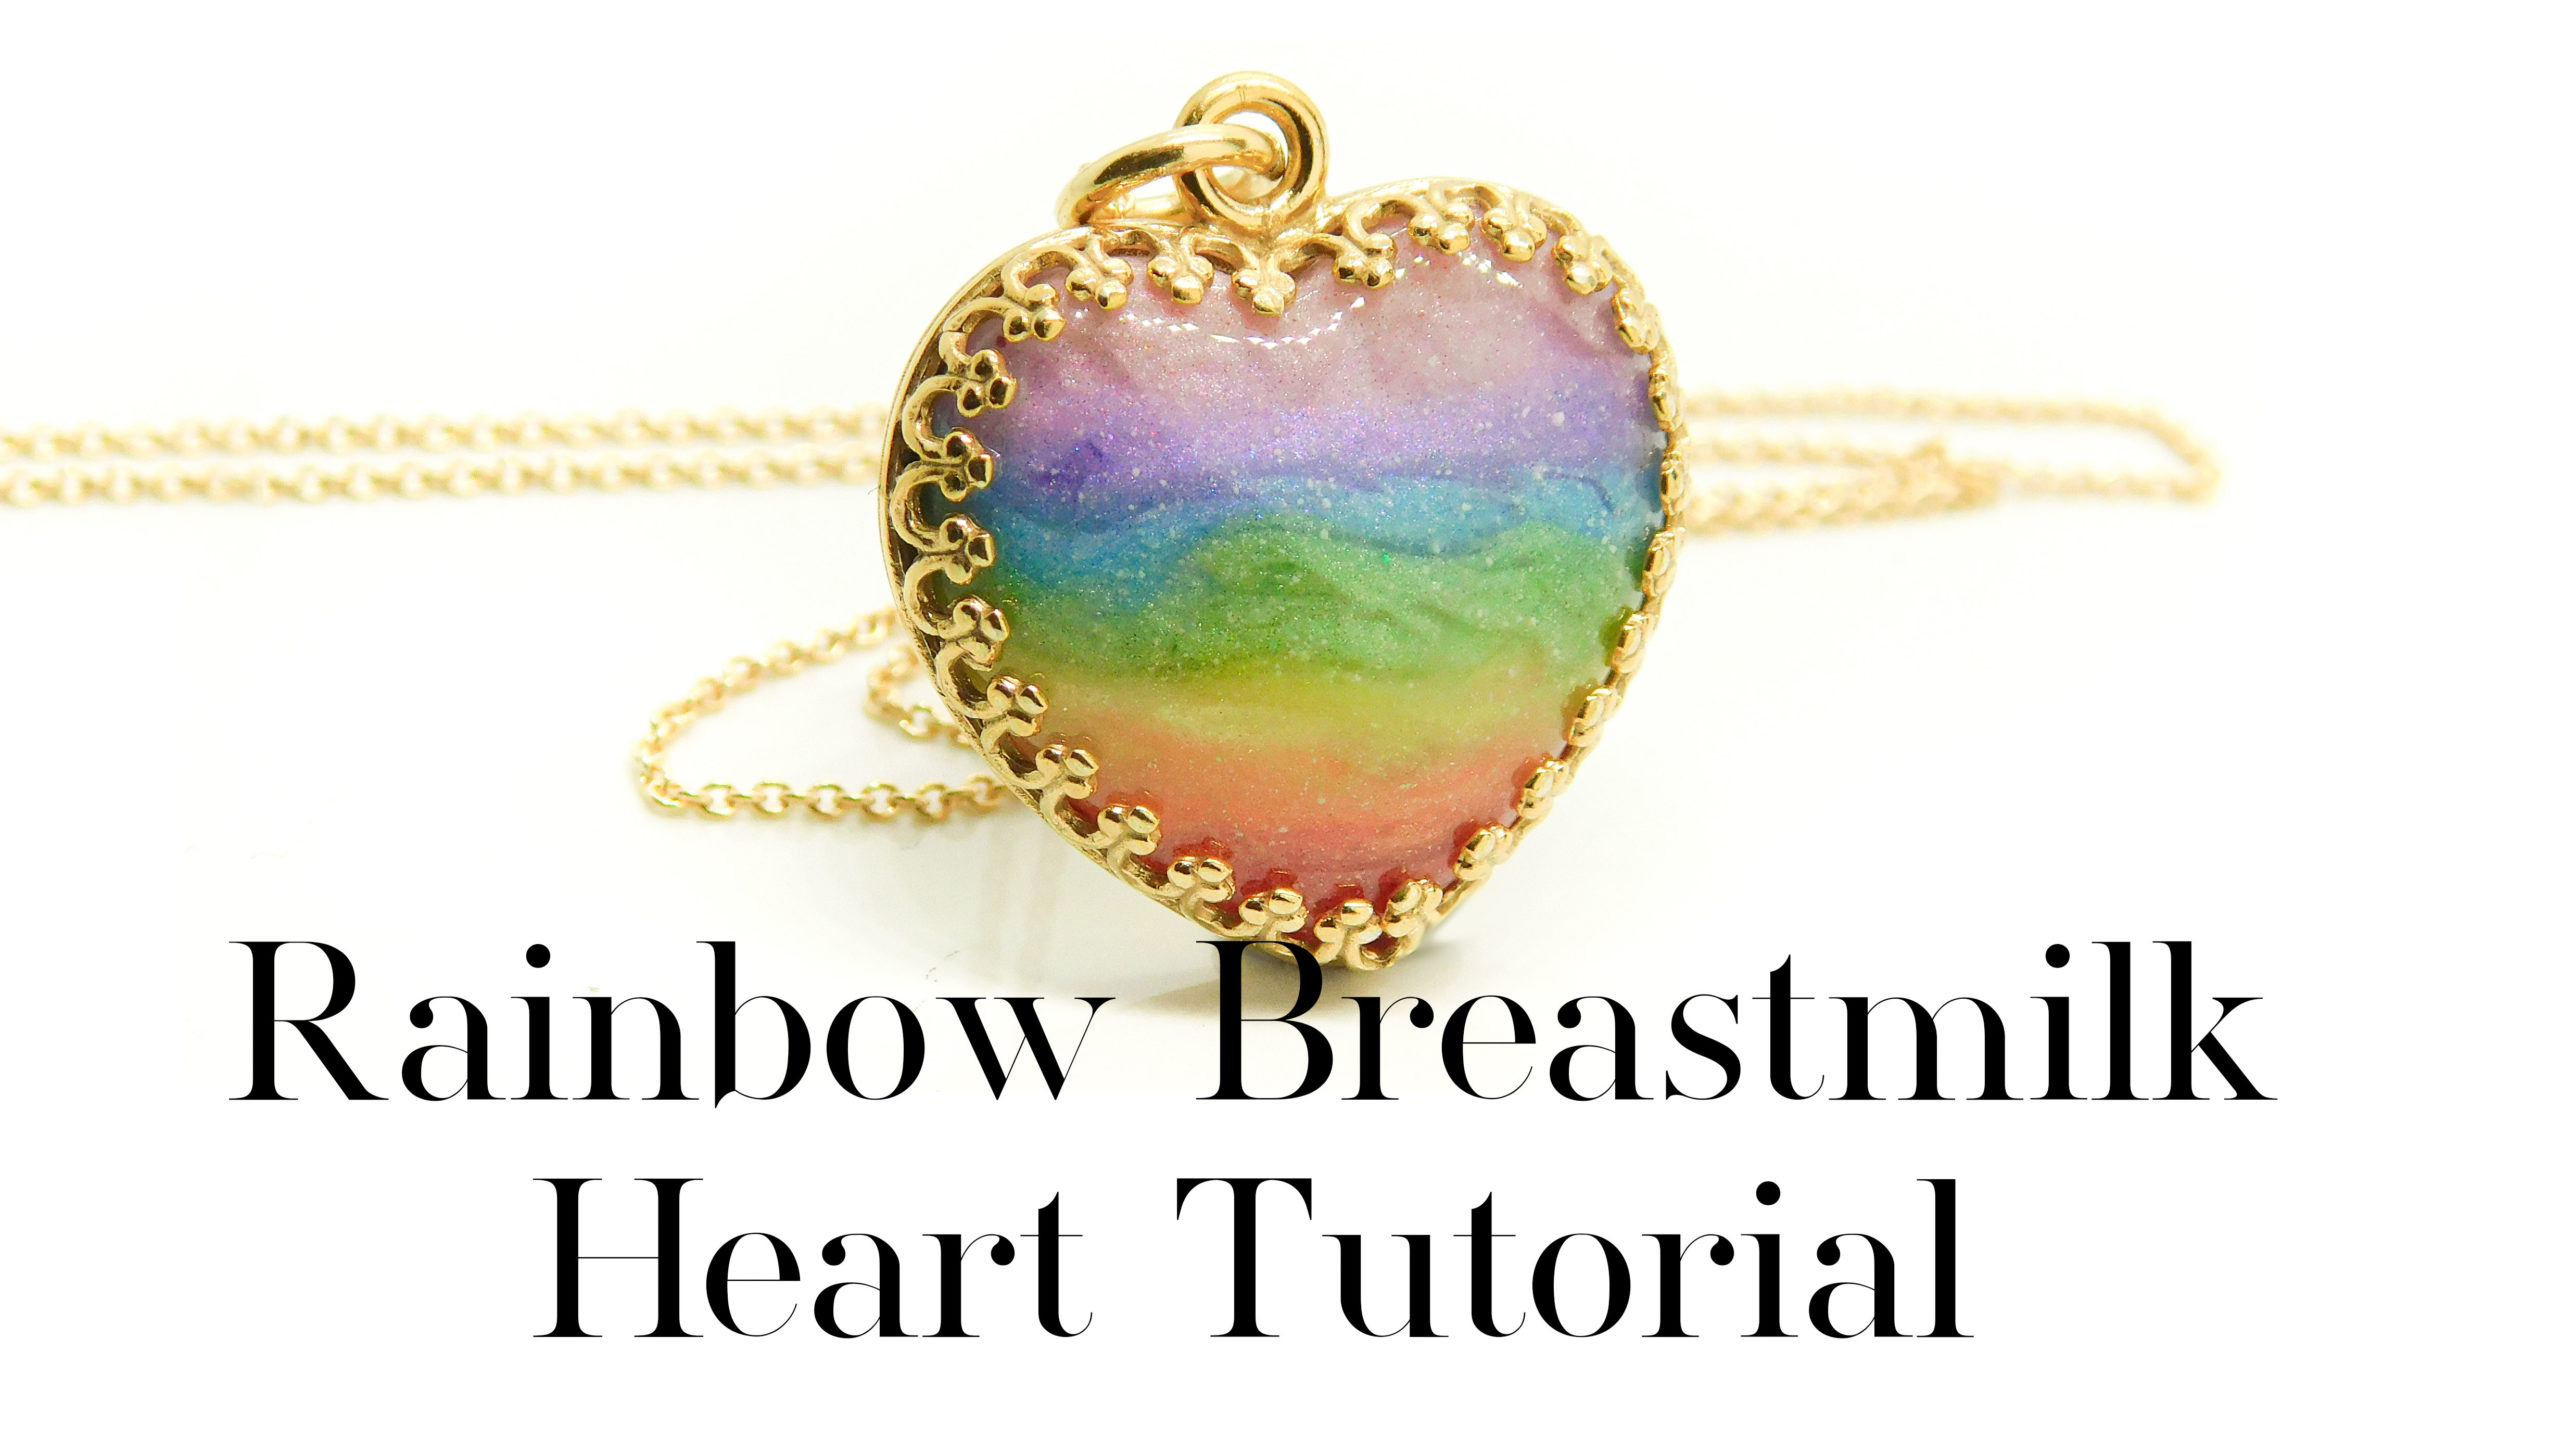 Rainbow Breastmilk Heart Tutorial, breastmilk rainbow gold necklace, gold plated solid silver setting and chain. 18mm crown point gold vermeil heart, breastmilk and shimmery pastel rainbow colours. Handmade breastfeeding keepsake jewellery tutorial on YouTube